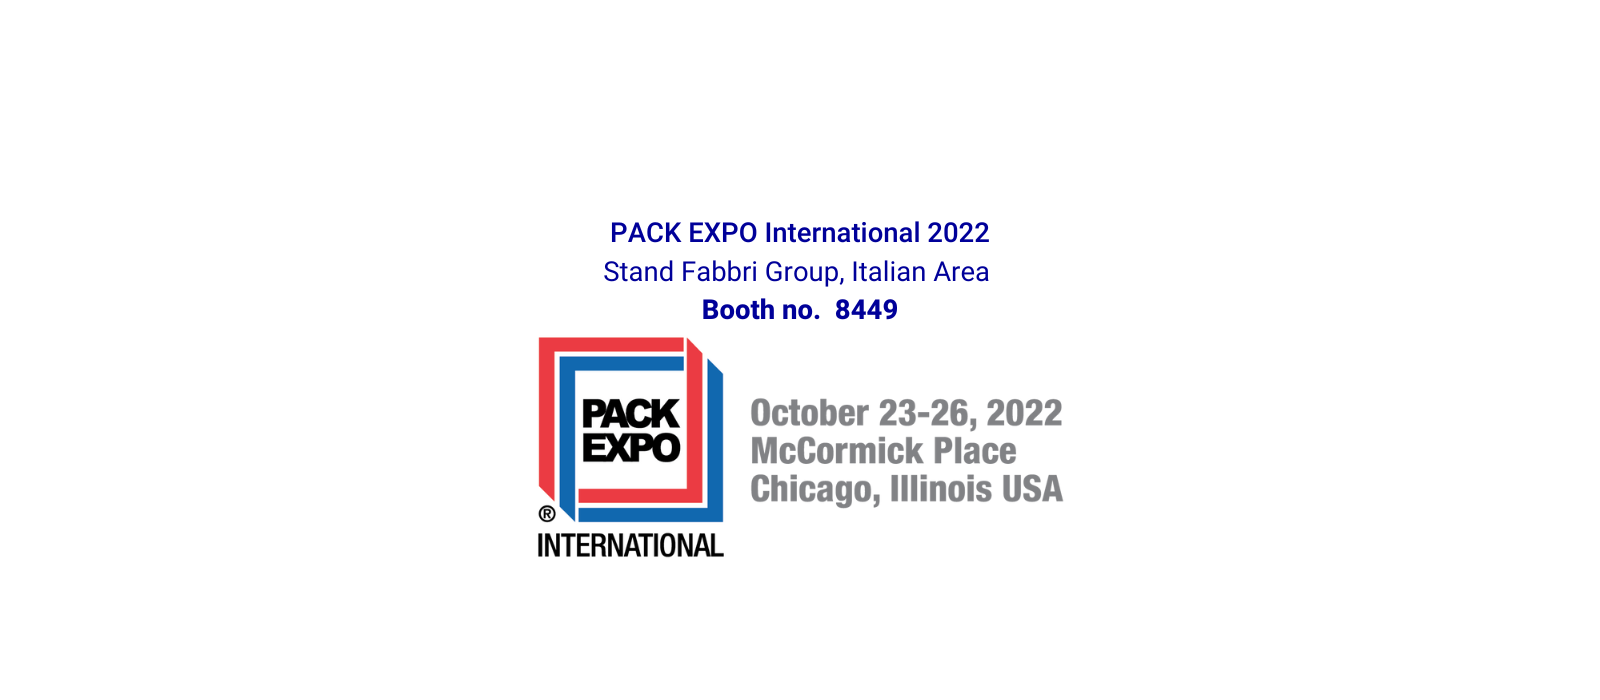 Let’s meet at Pack Expo International 2022